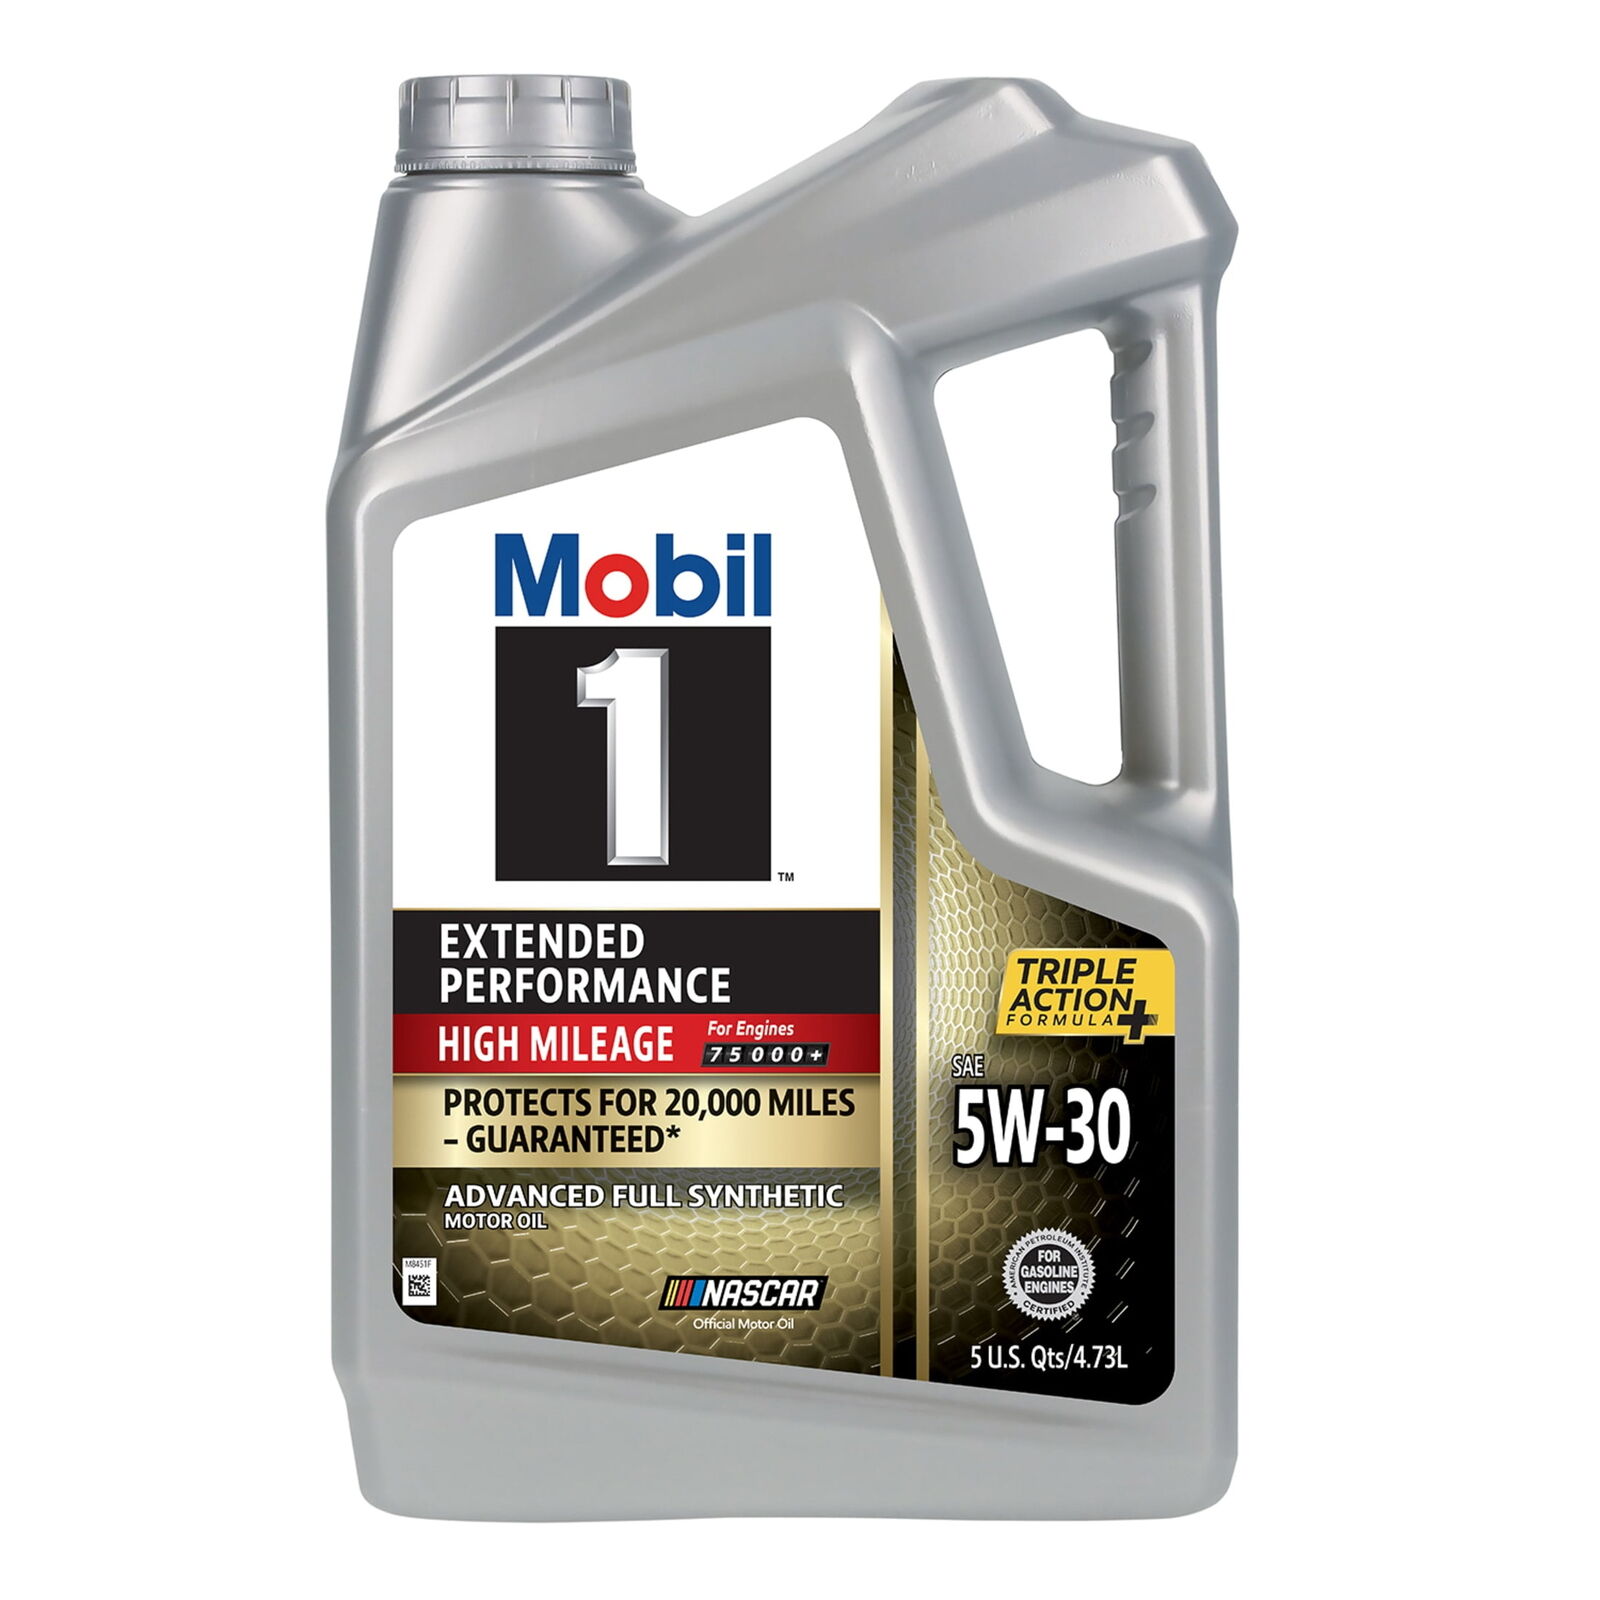 Extended Performance High Mileage Full Synthetic Motor Oil 5W-30, 5 Quart,new